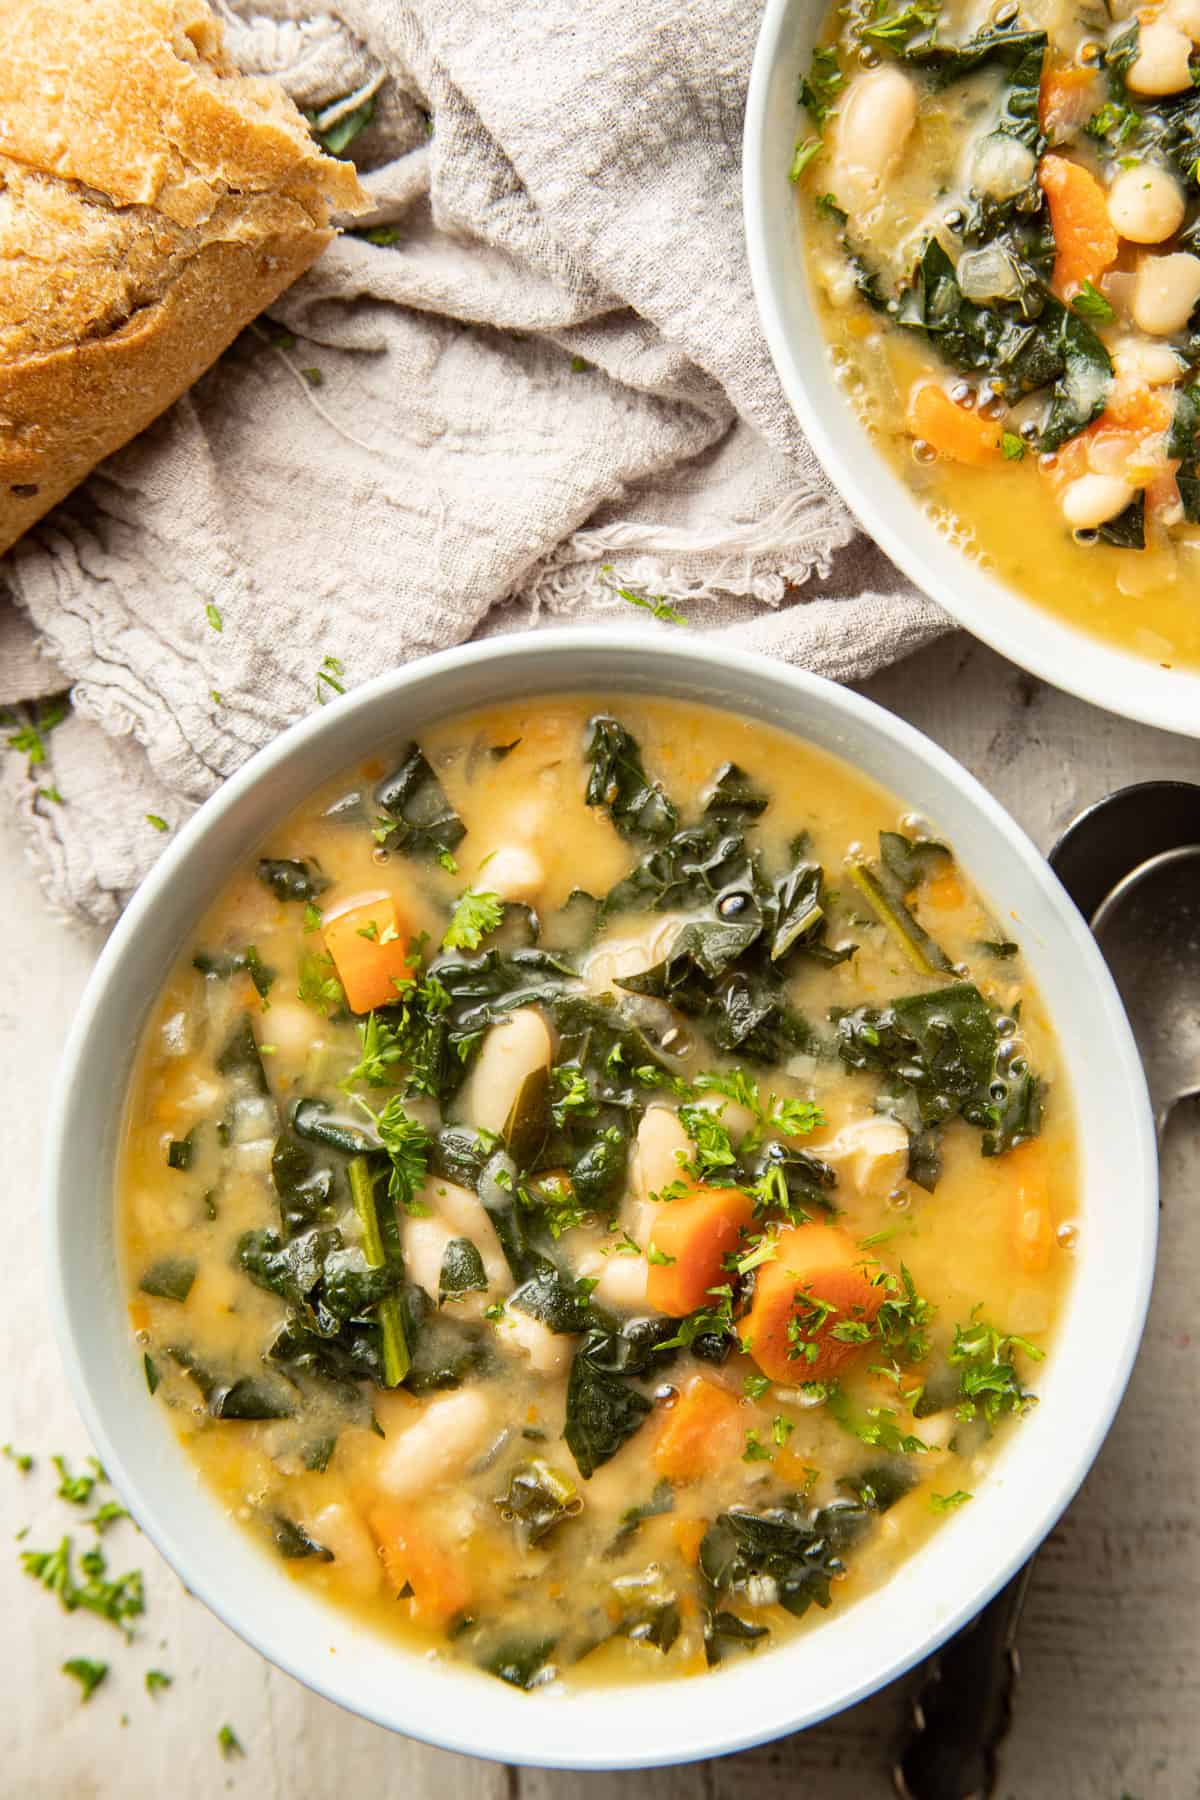 Two bowls of Tuscan Kale Soup and a baguette.